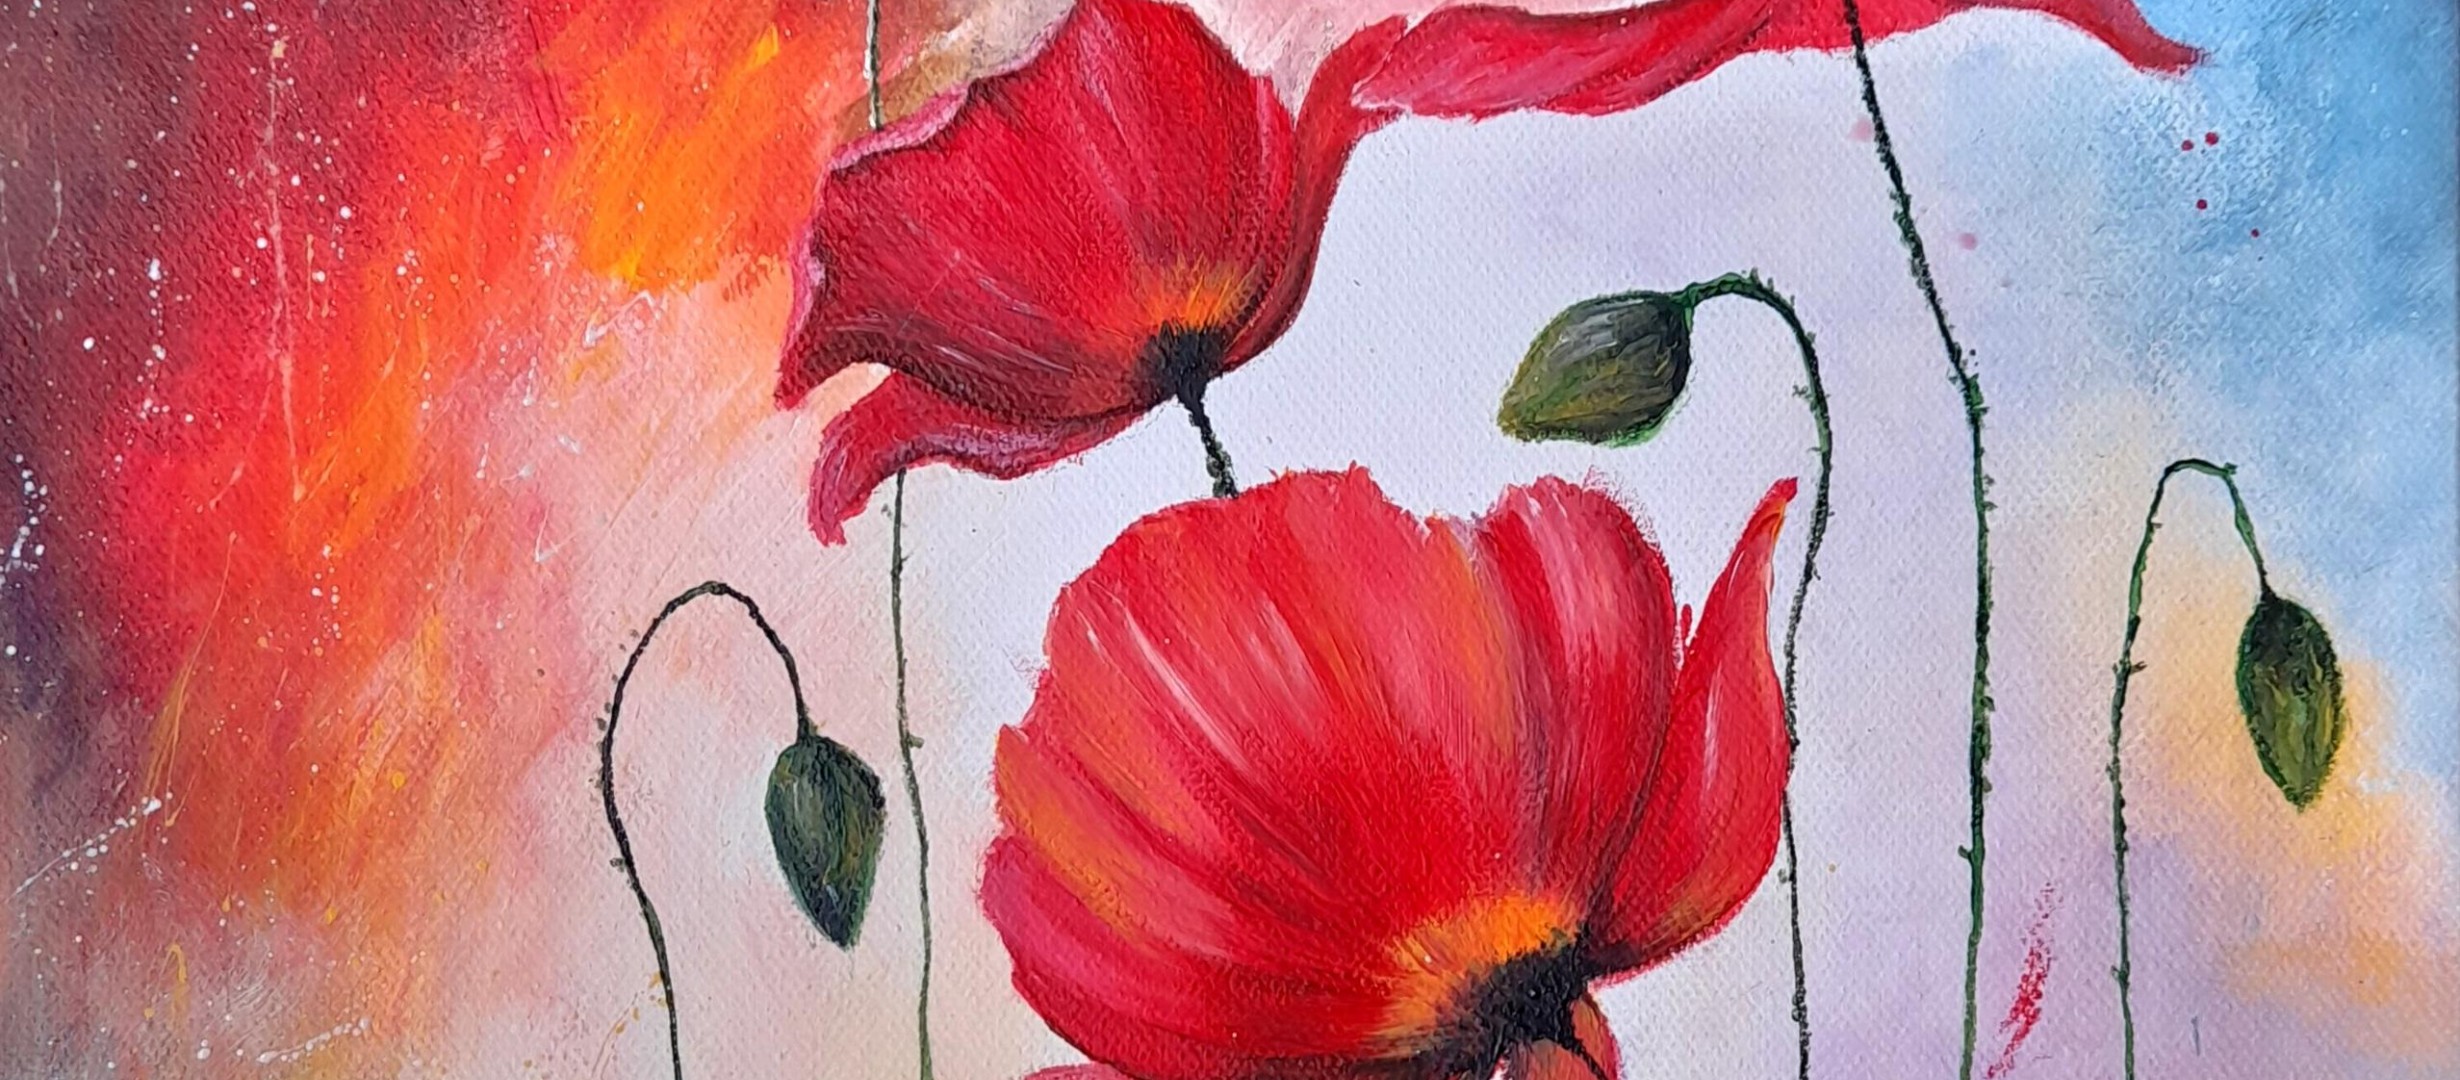 An acrylic painting of red poppies